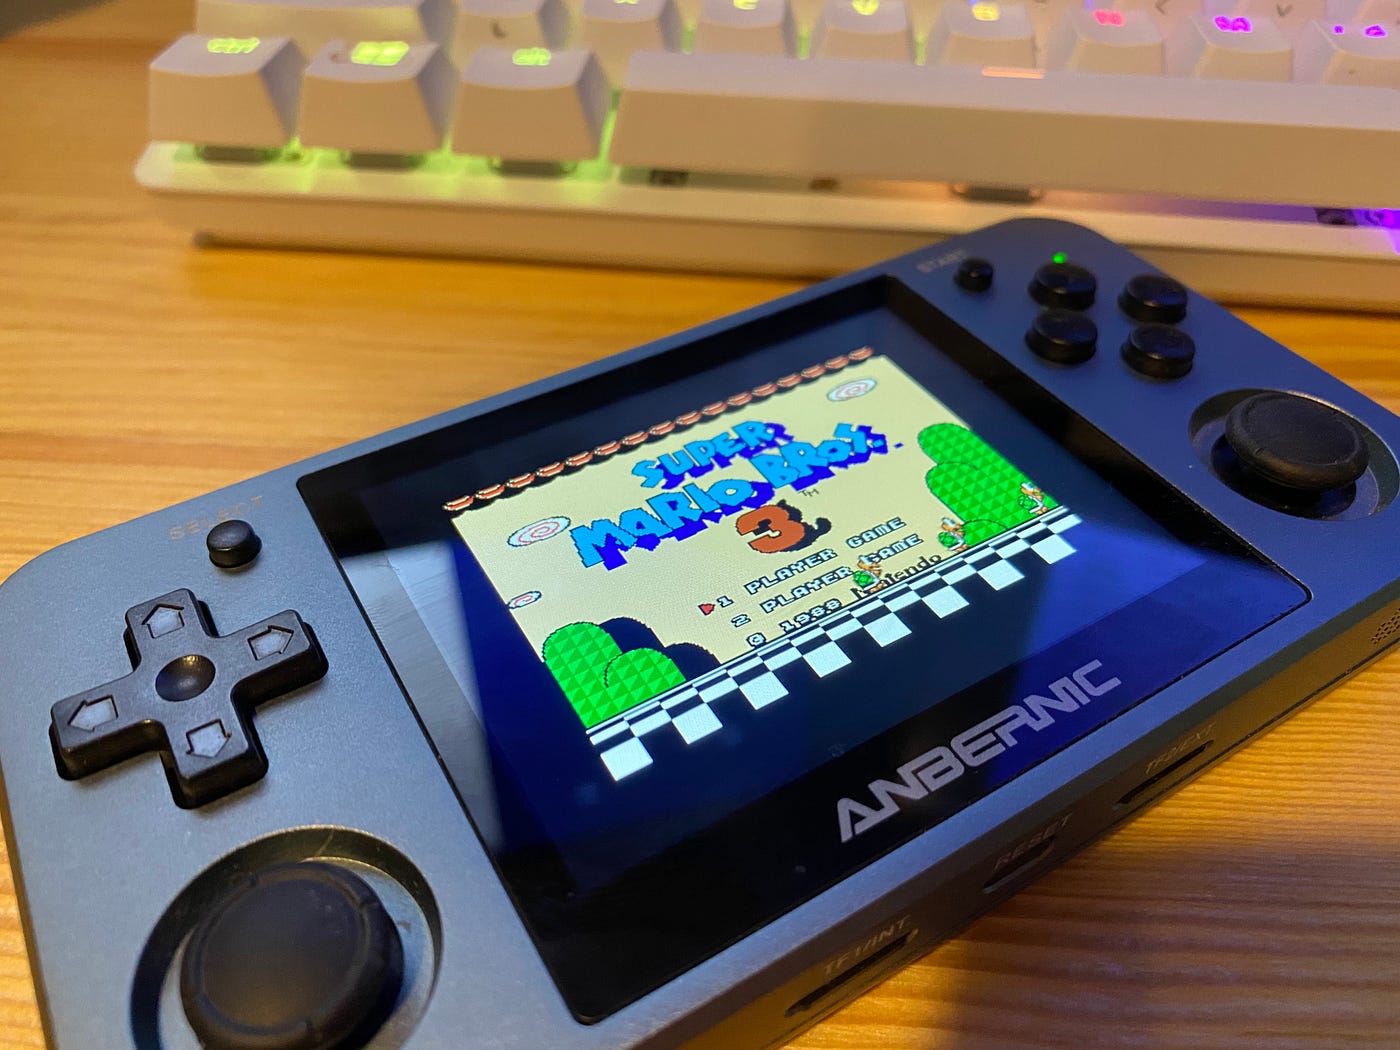 Anbernic RG350M Review. The retro gamer's handheld | by Joe Lavoie ...